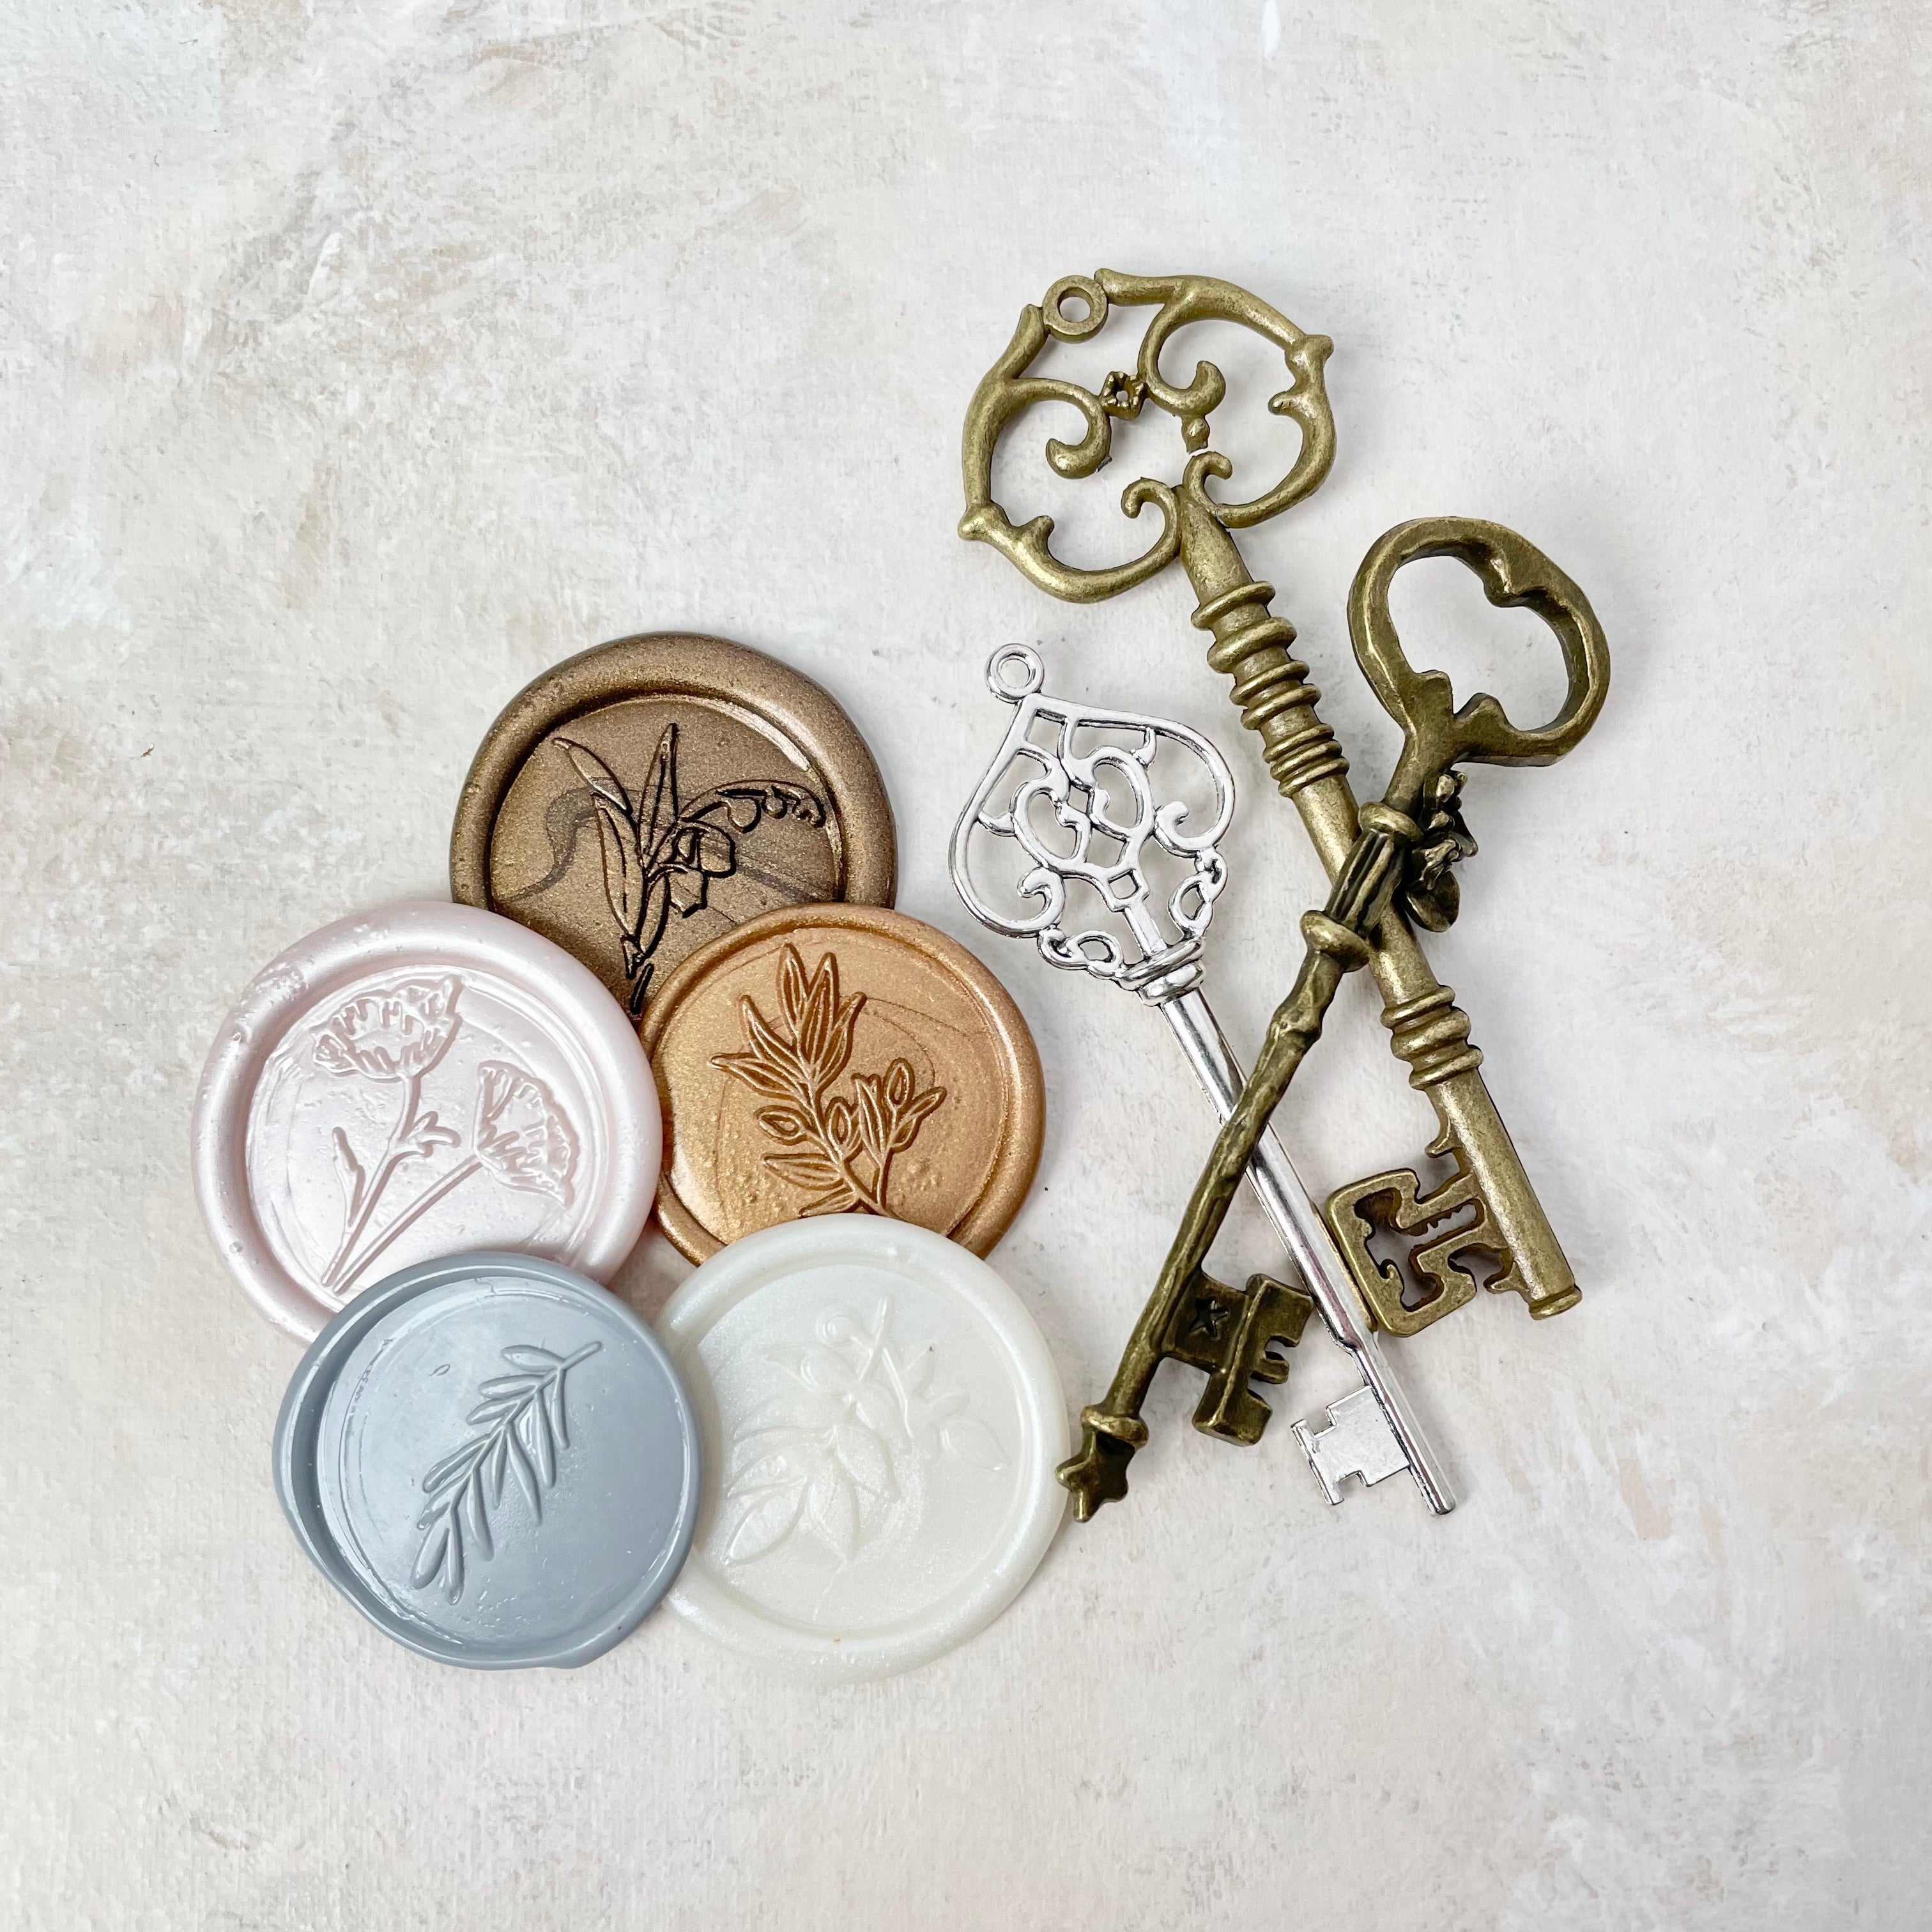 Classic Flatlay Styling Kit including wax seals and styling keys - must have Wedding Flat lay props from Champagne & GRIT